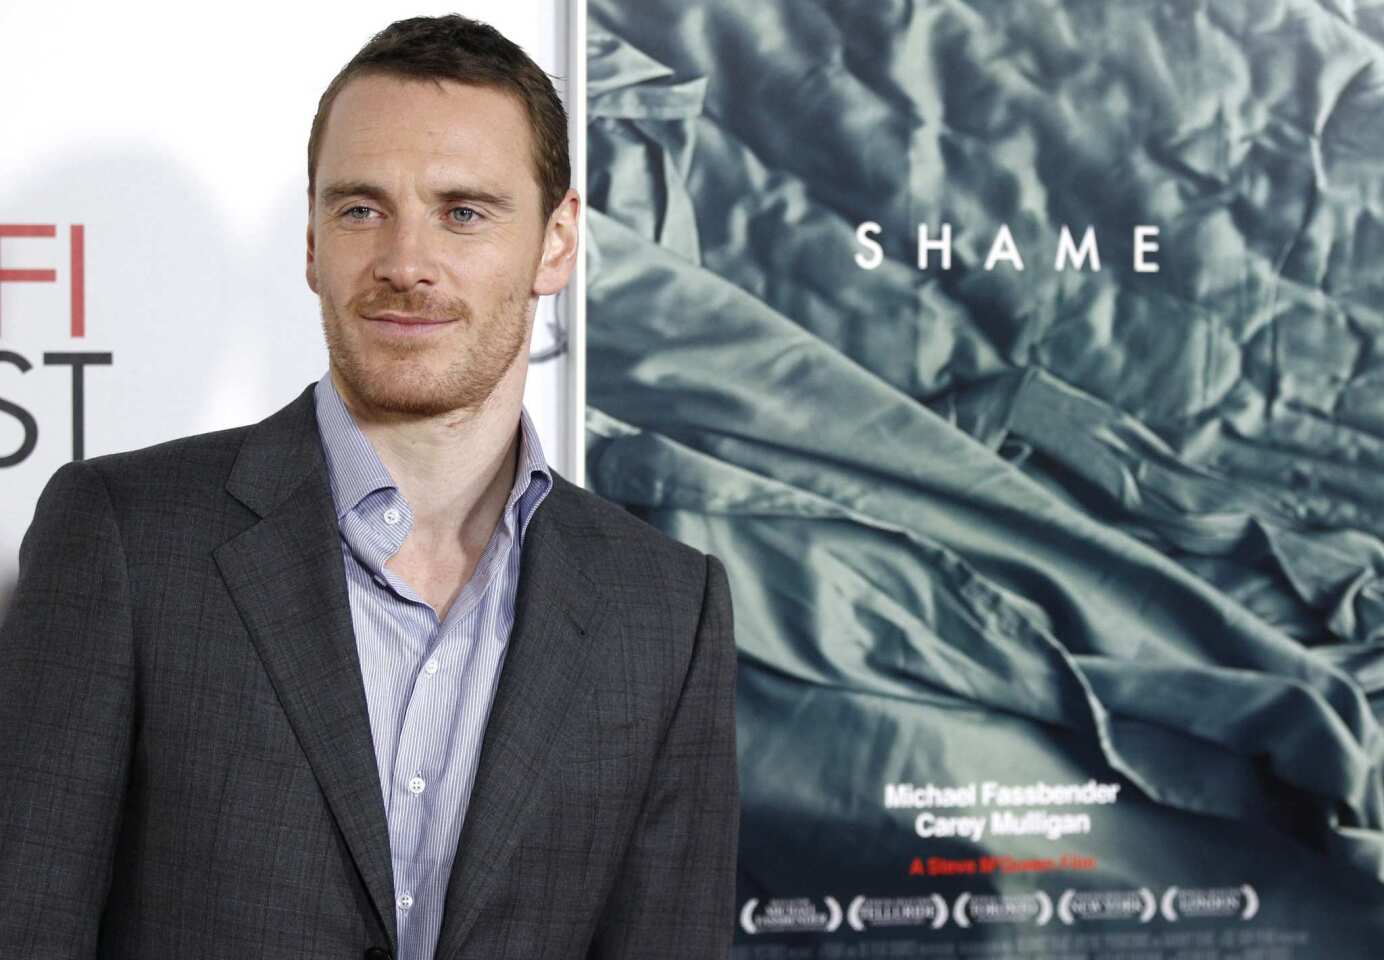 Michael Fassbender attends the showing of "Shame" on Wednesday night at the AFI Festival. The British star plays Brandon, a New York yuppie with a sex addiction. When his younger sister moves in with him, his life is thrown off course.